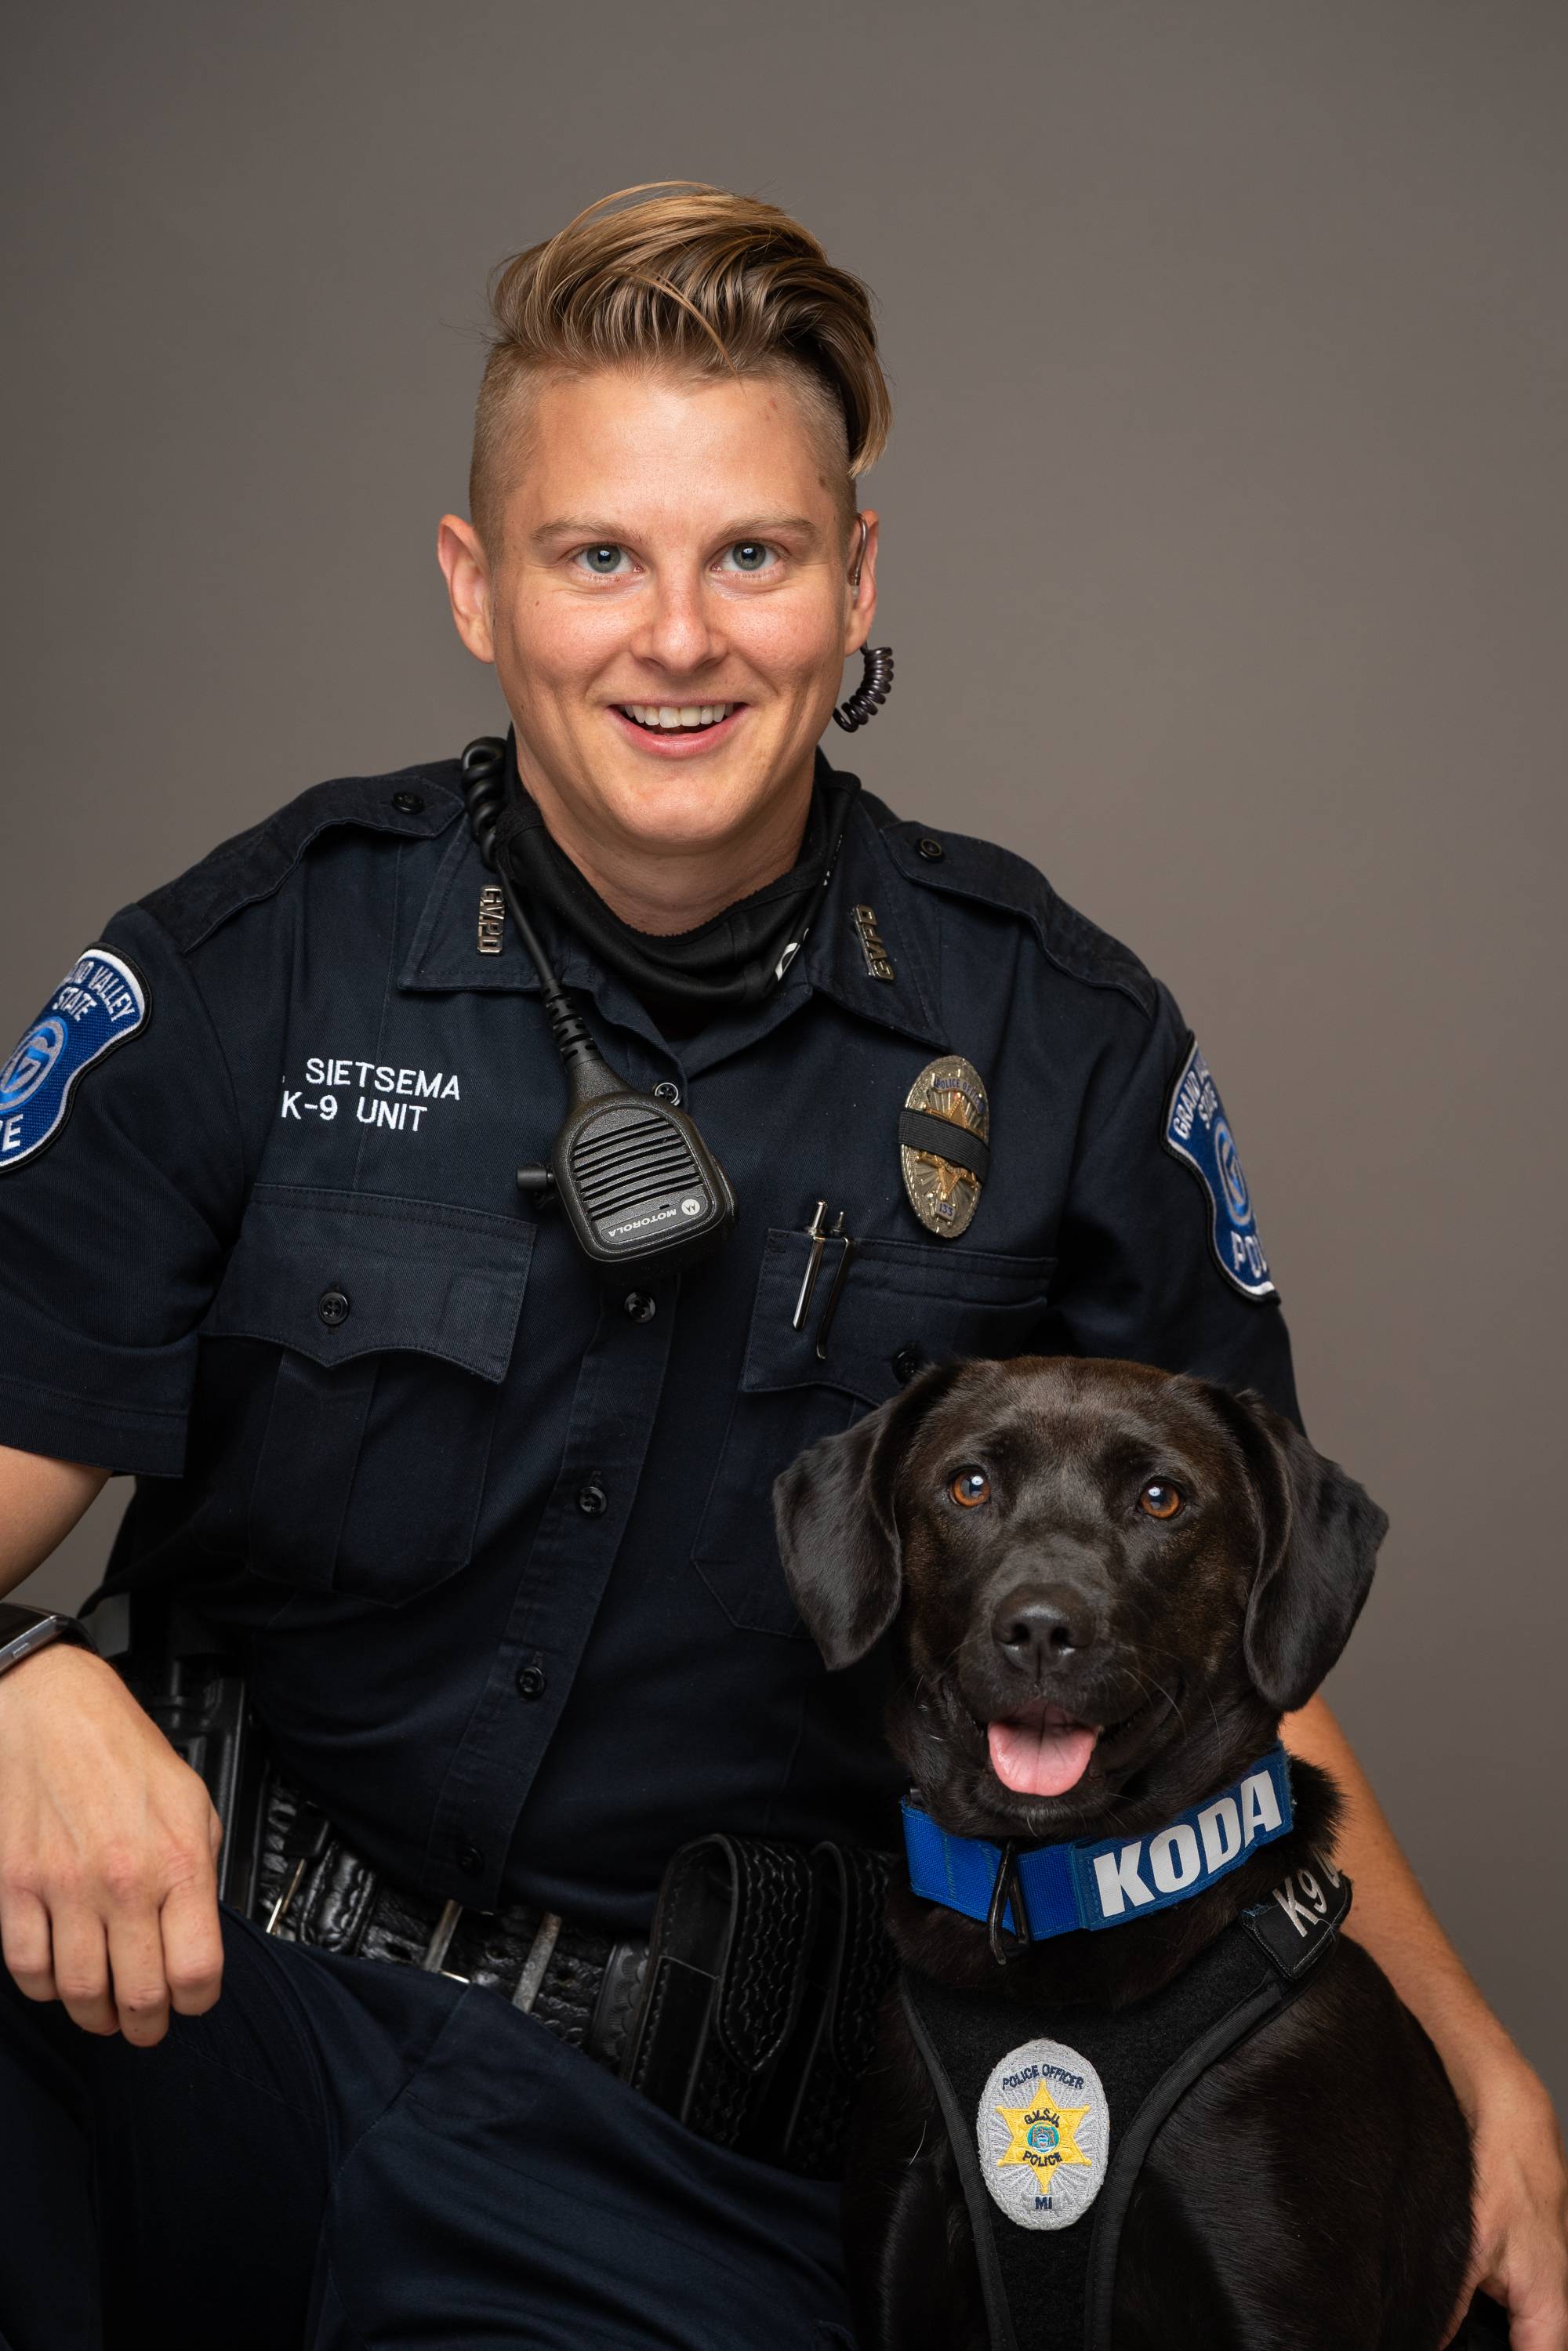 Officer Sietsema portrait photo while wearing police uniform with police dog Koda, who is a black Labrador wearing a harness with a police badge